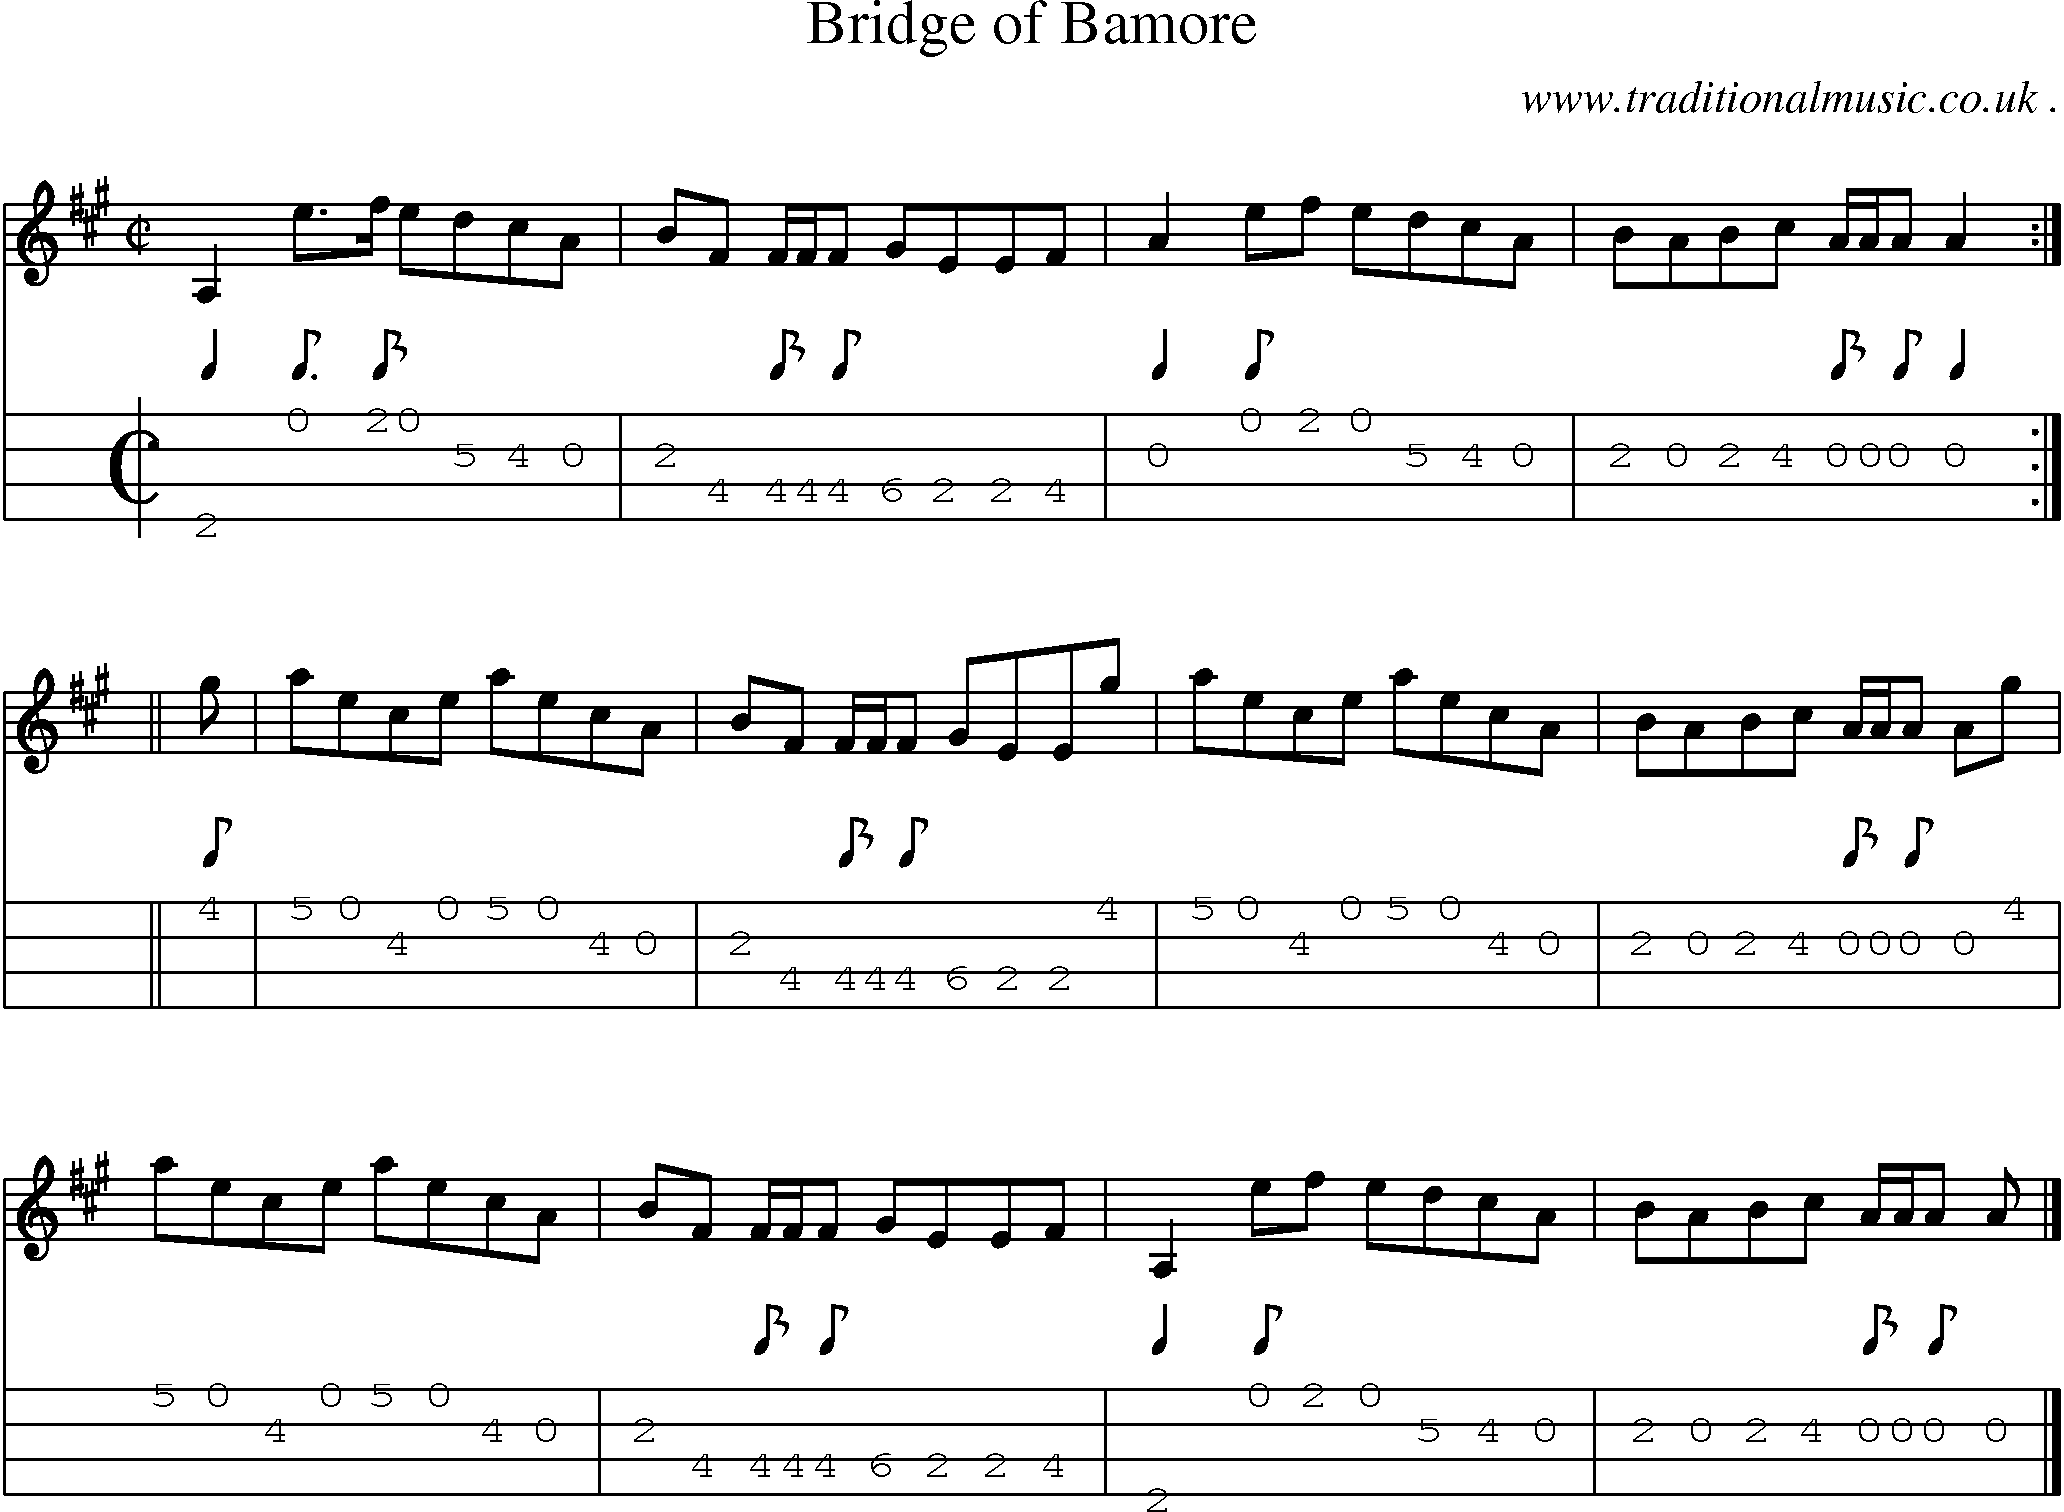 Sheet-music  score, Chords and Mandolin Tabs for Bridge Of Bamore